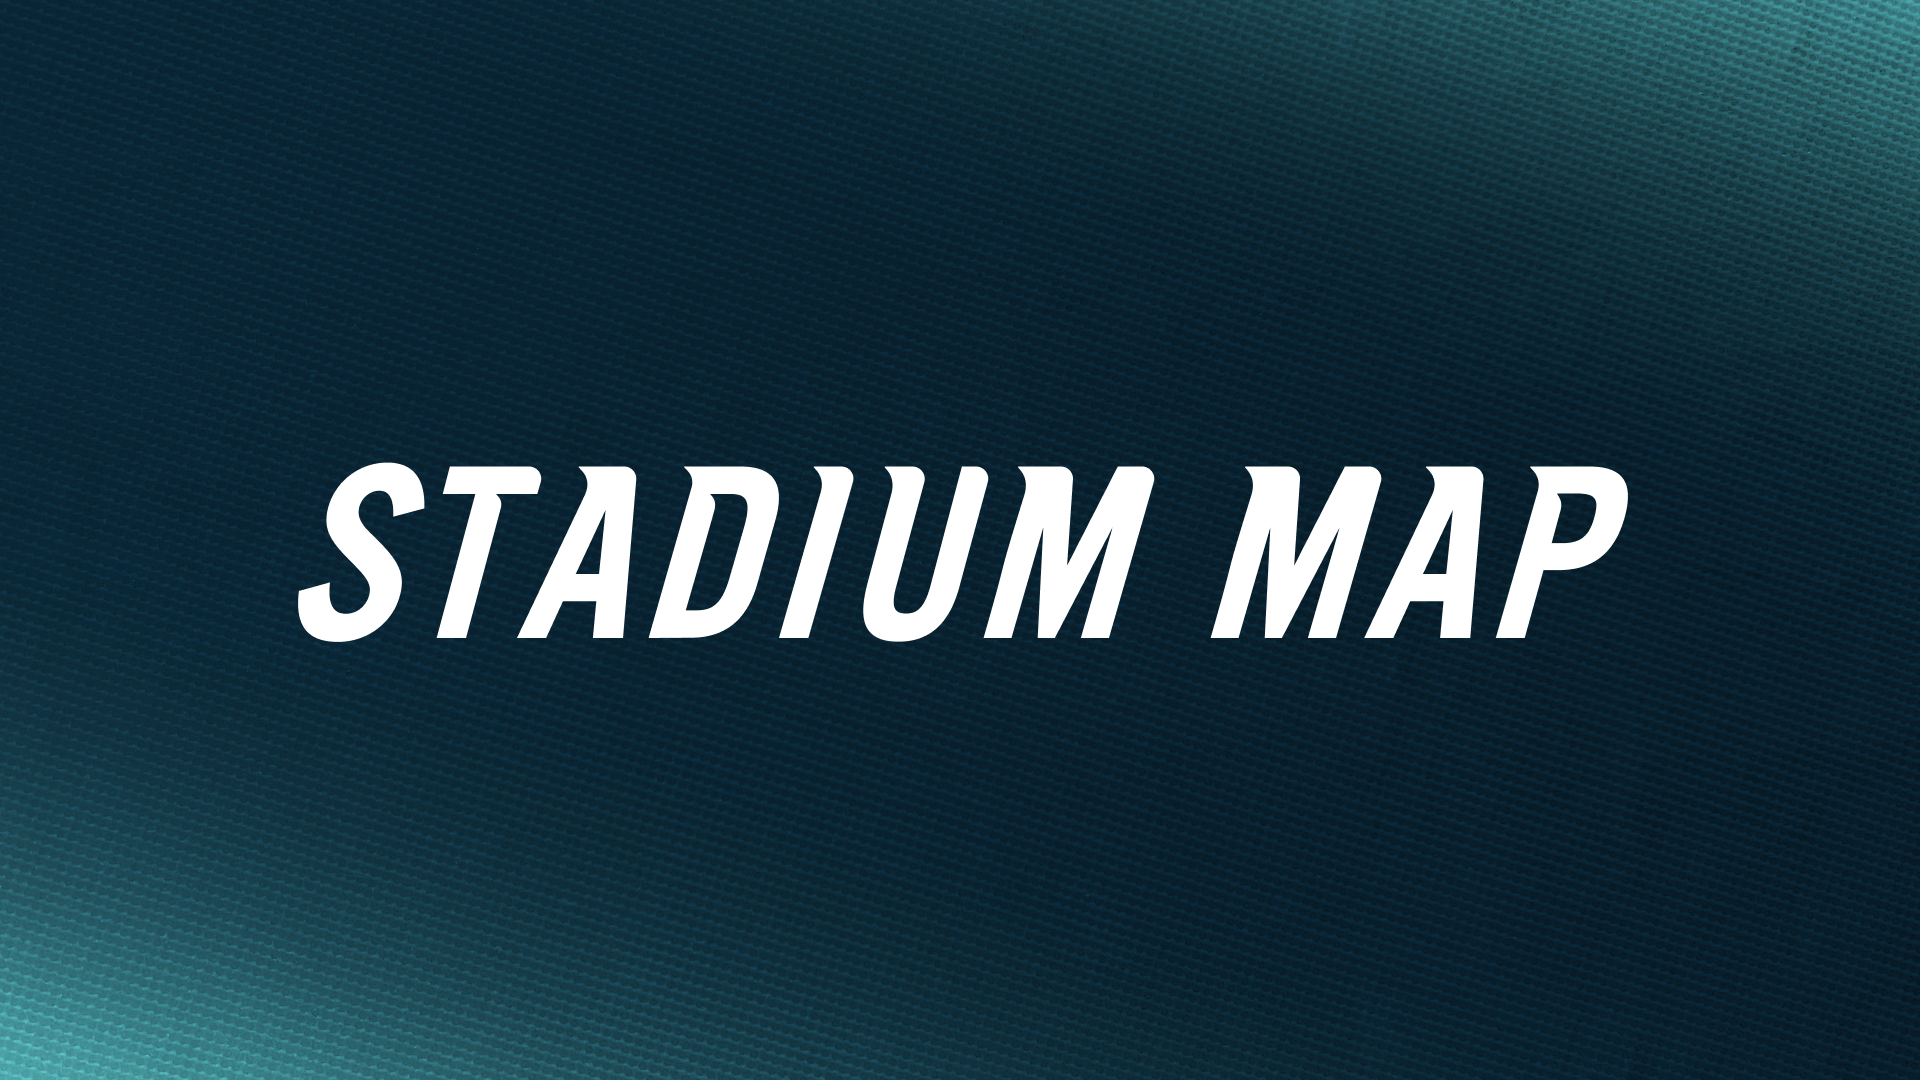 A graphic with the text "Stadium Map" on a navy background.